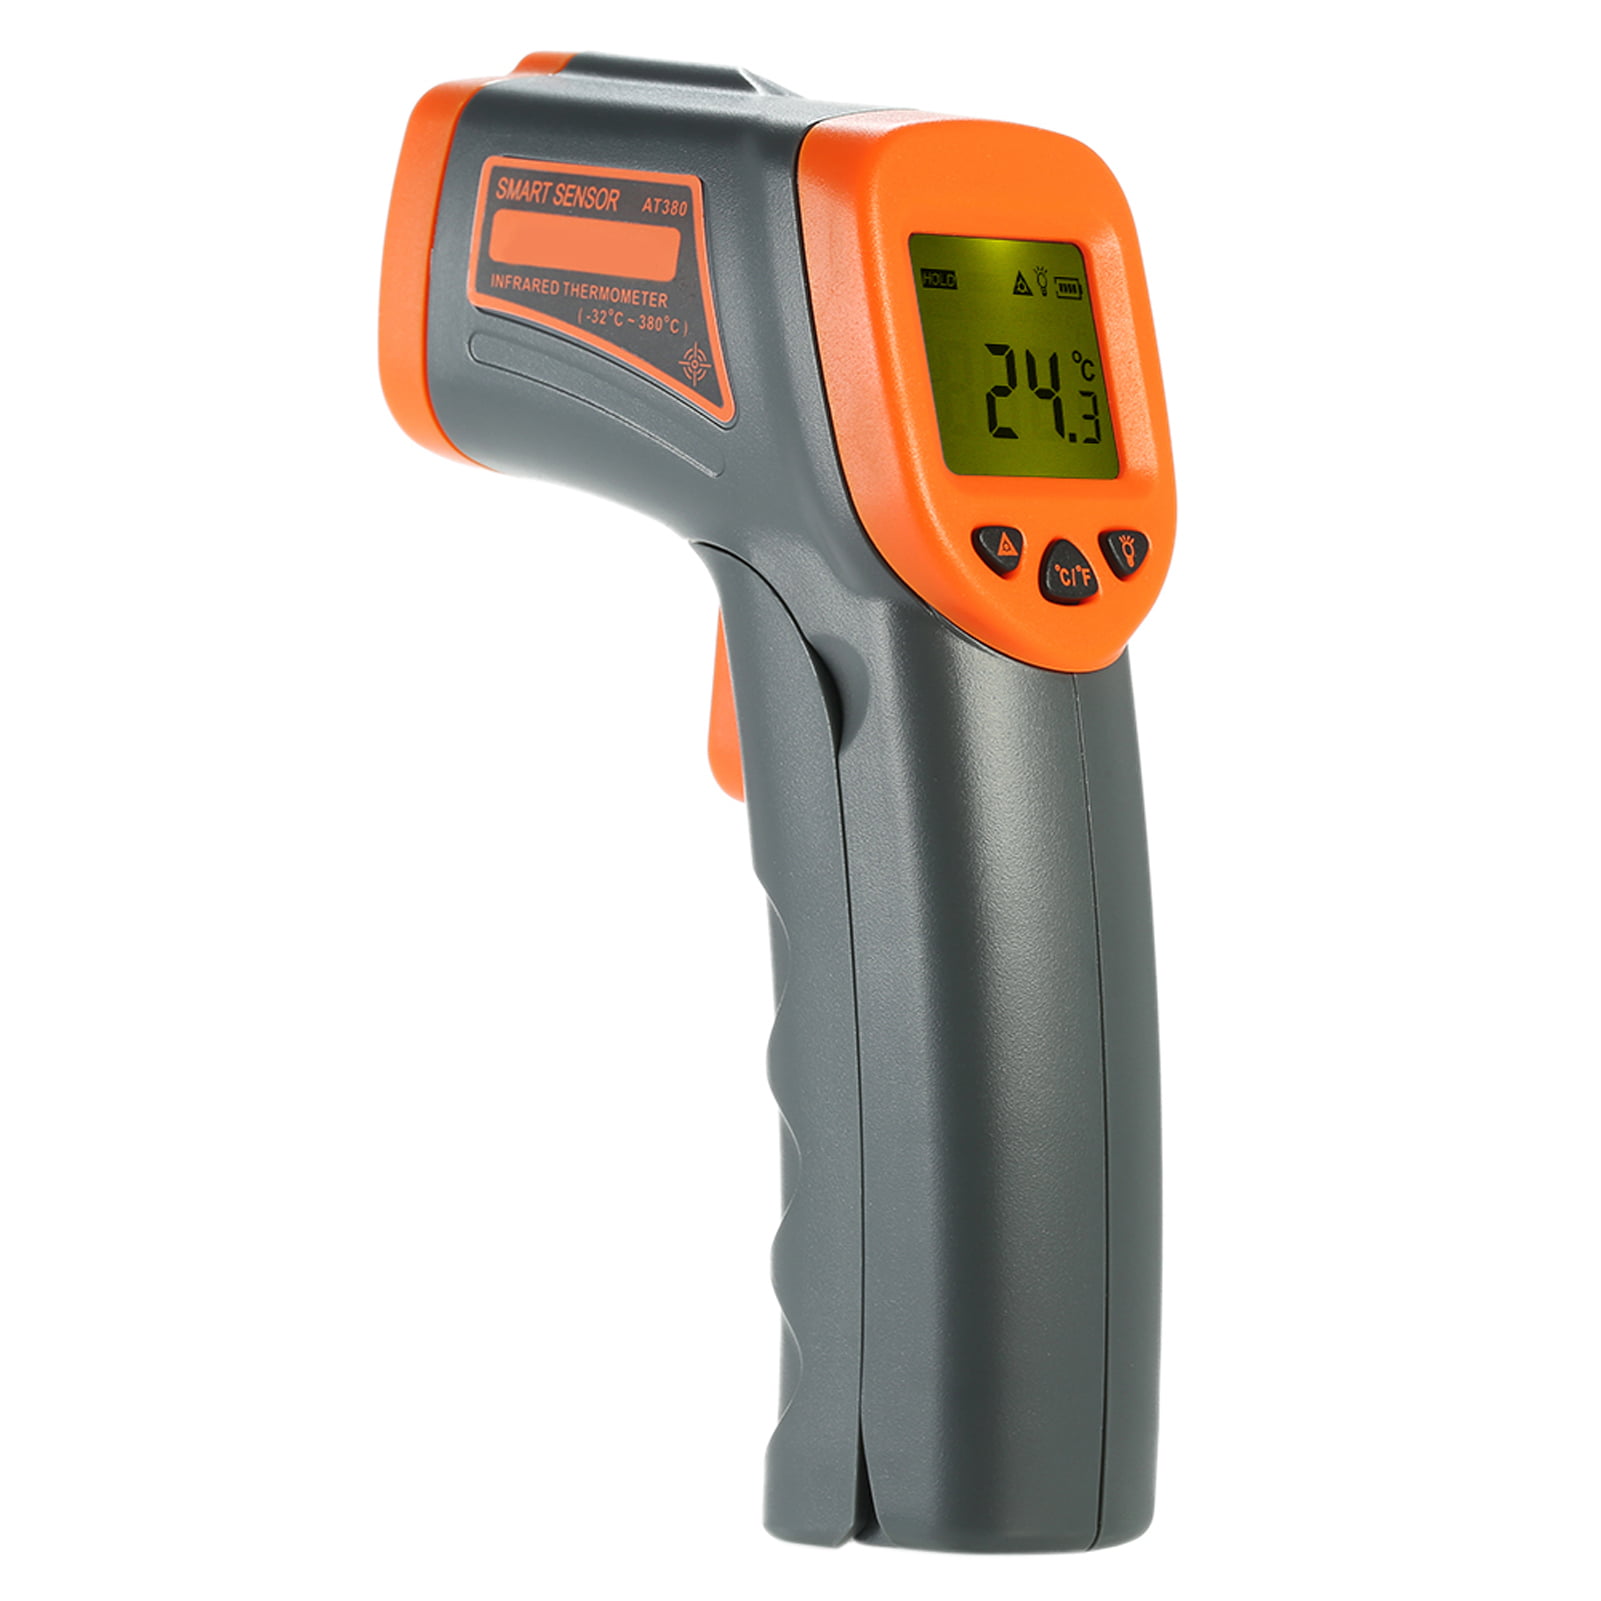 Portable Non-contact Infrared Thermometer with LCD Display